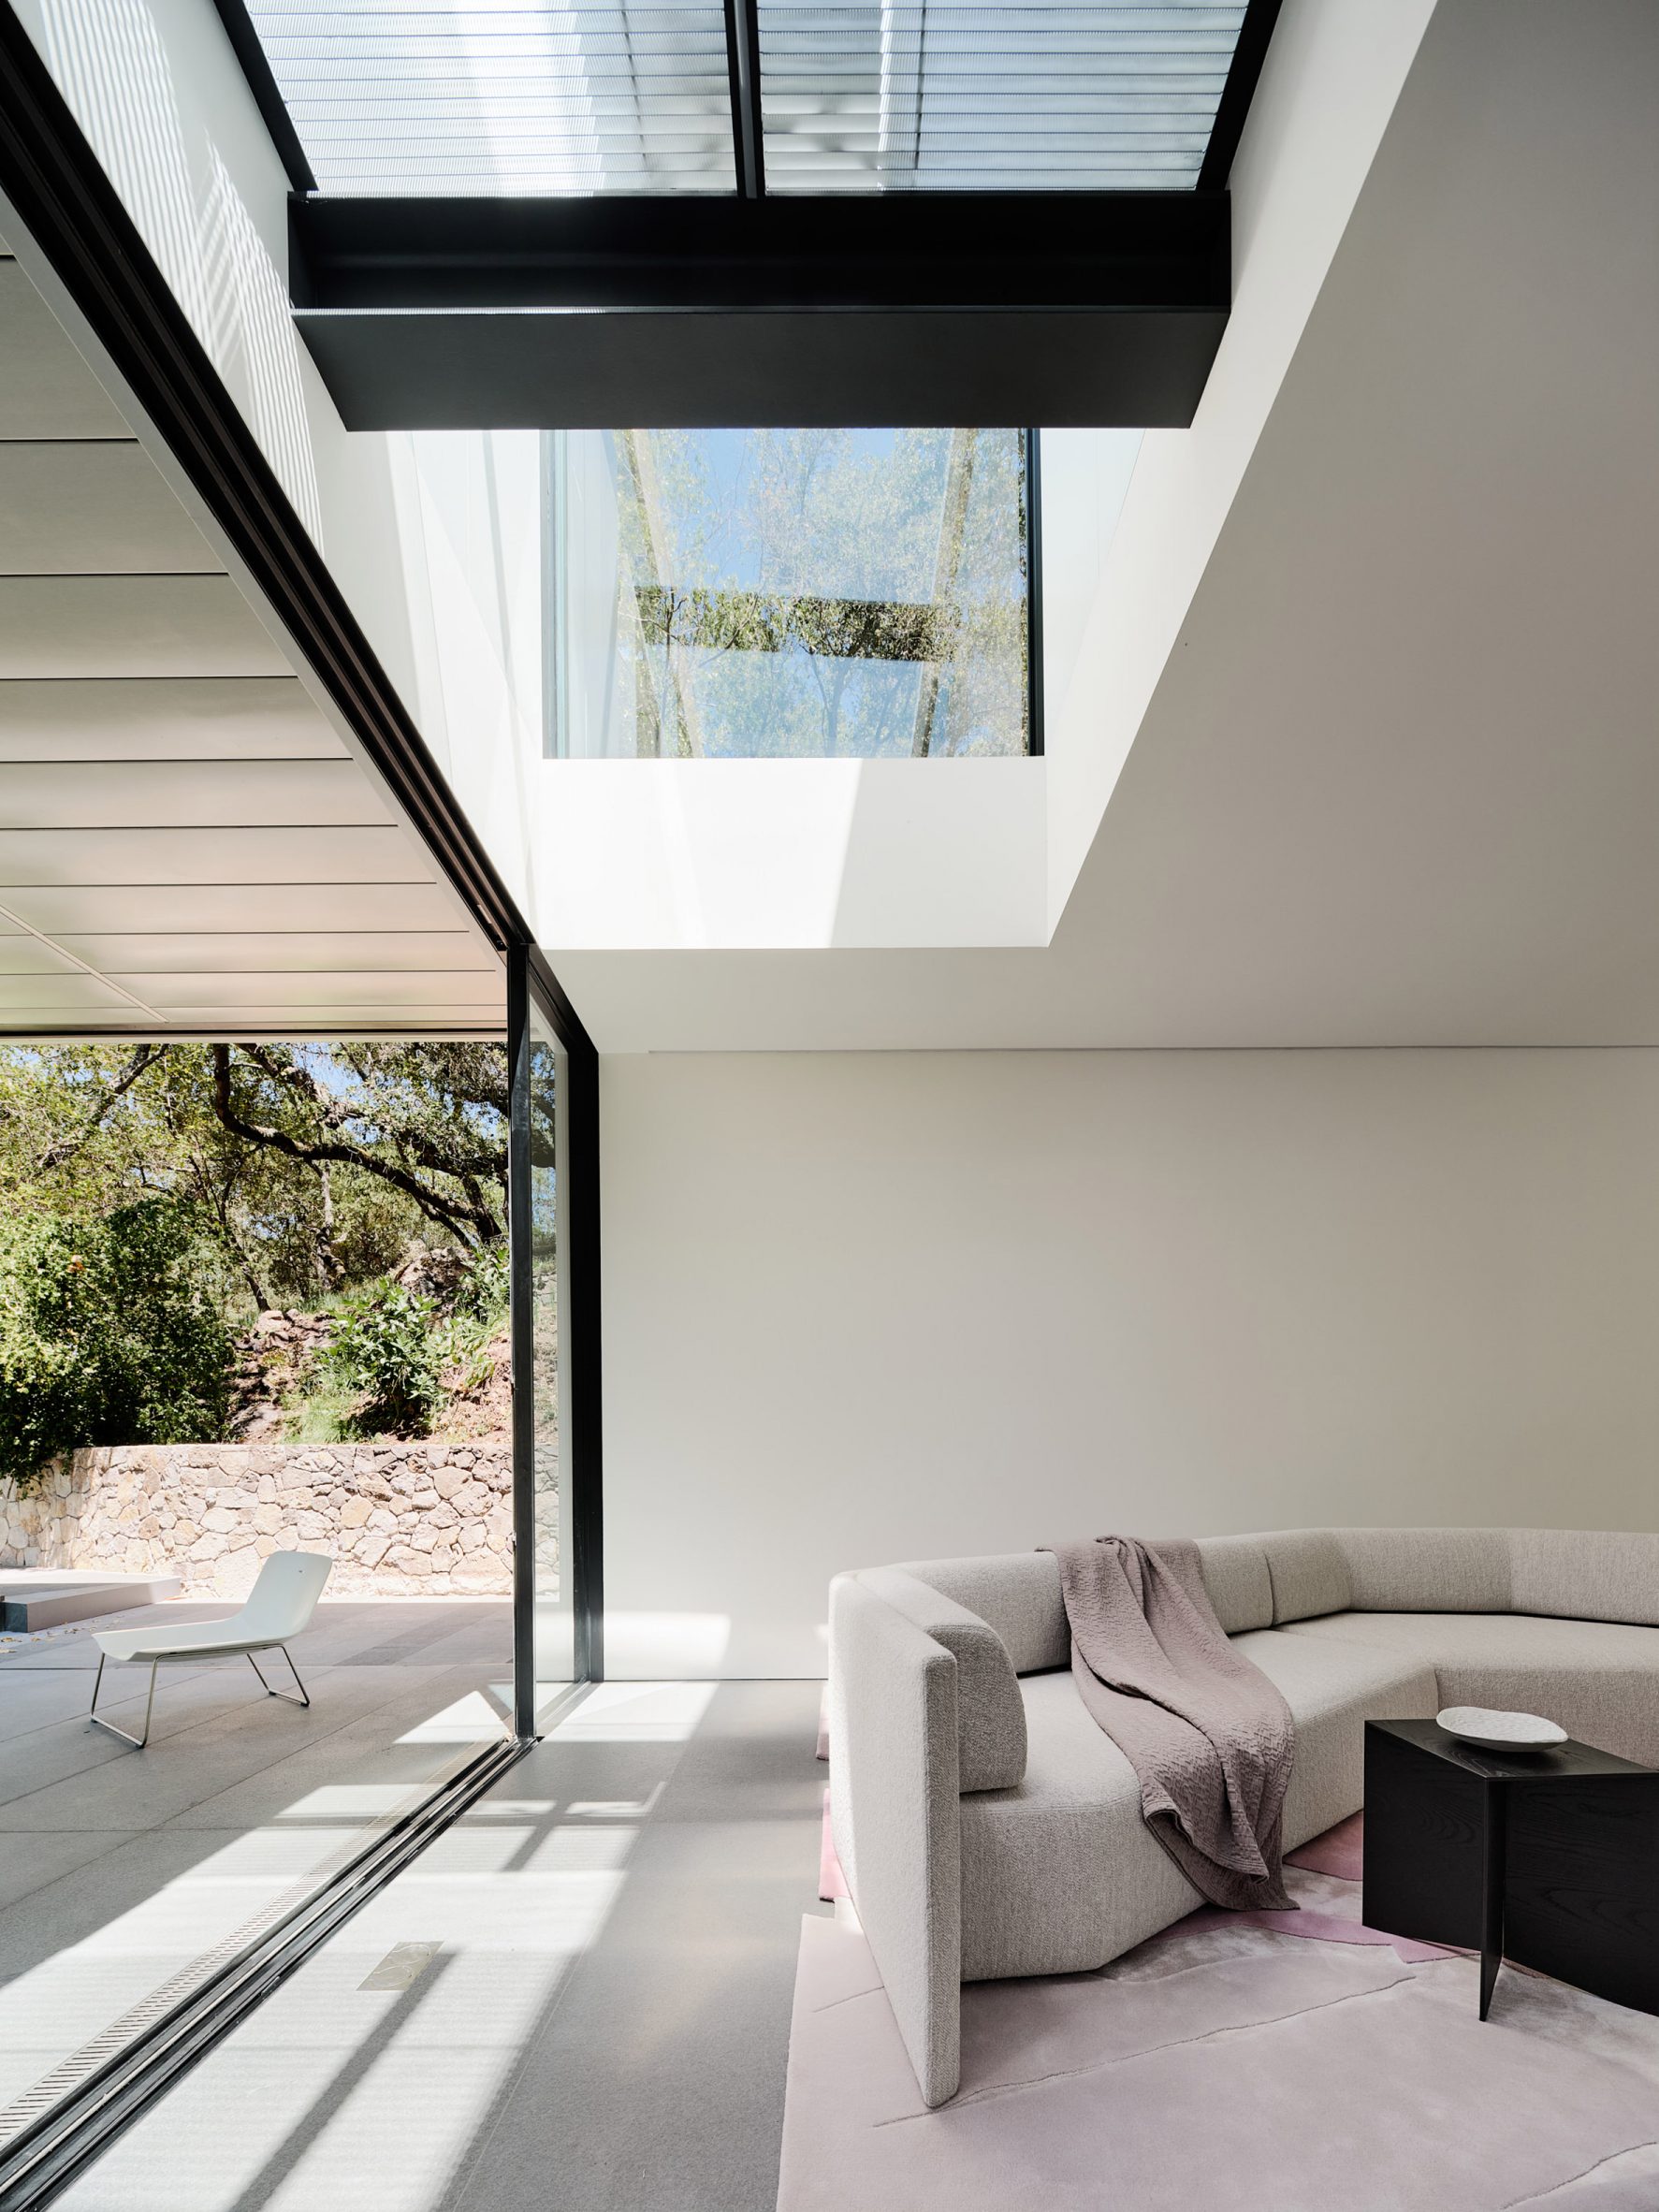 Living room in California house with glass wall and skylight